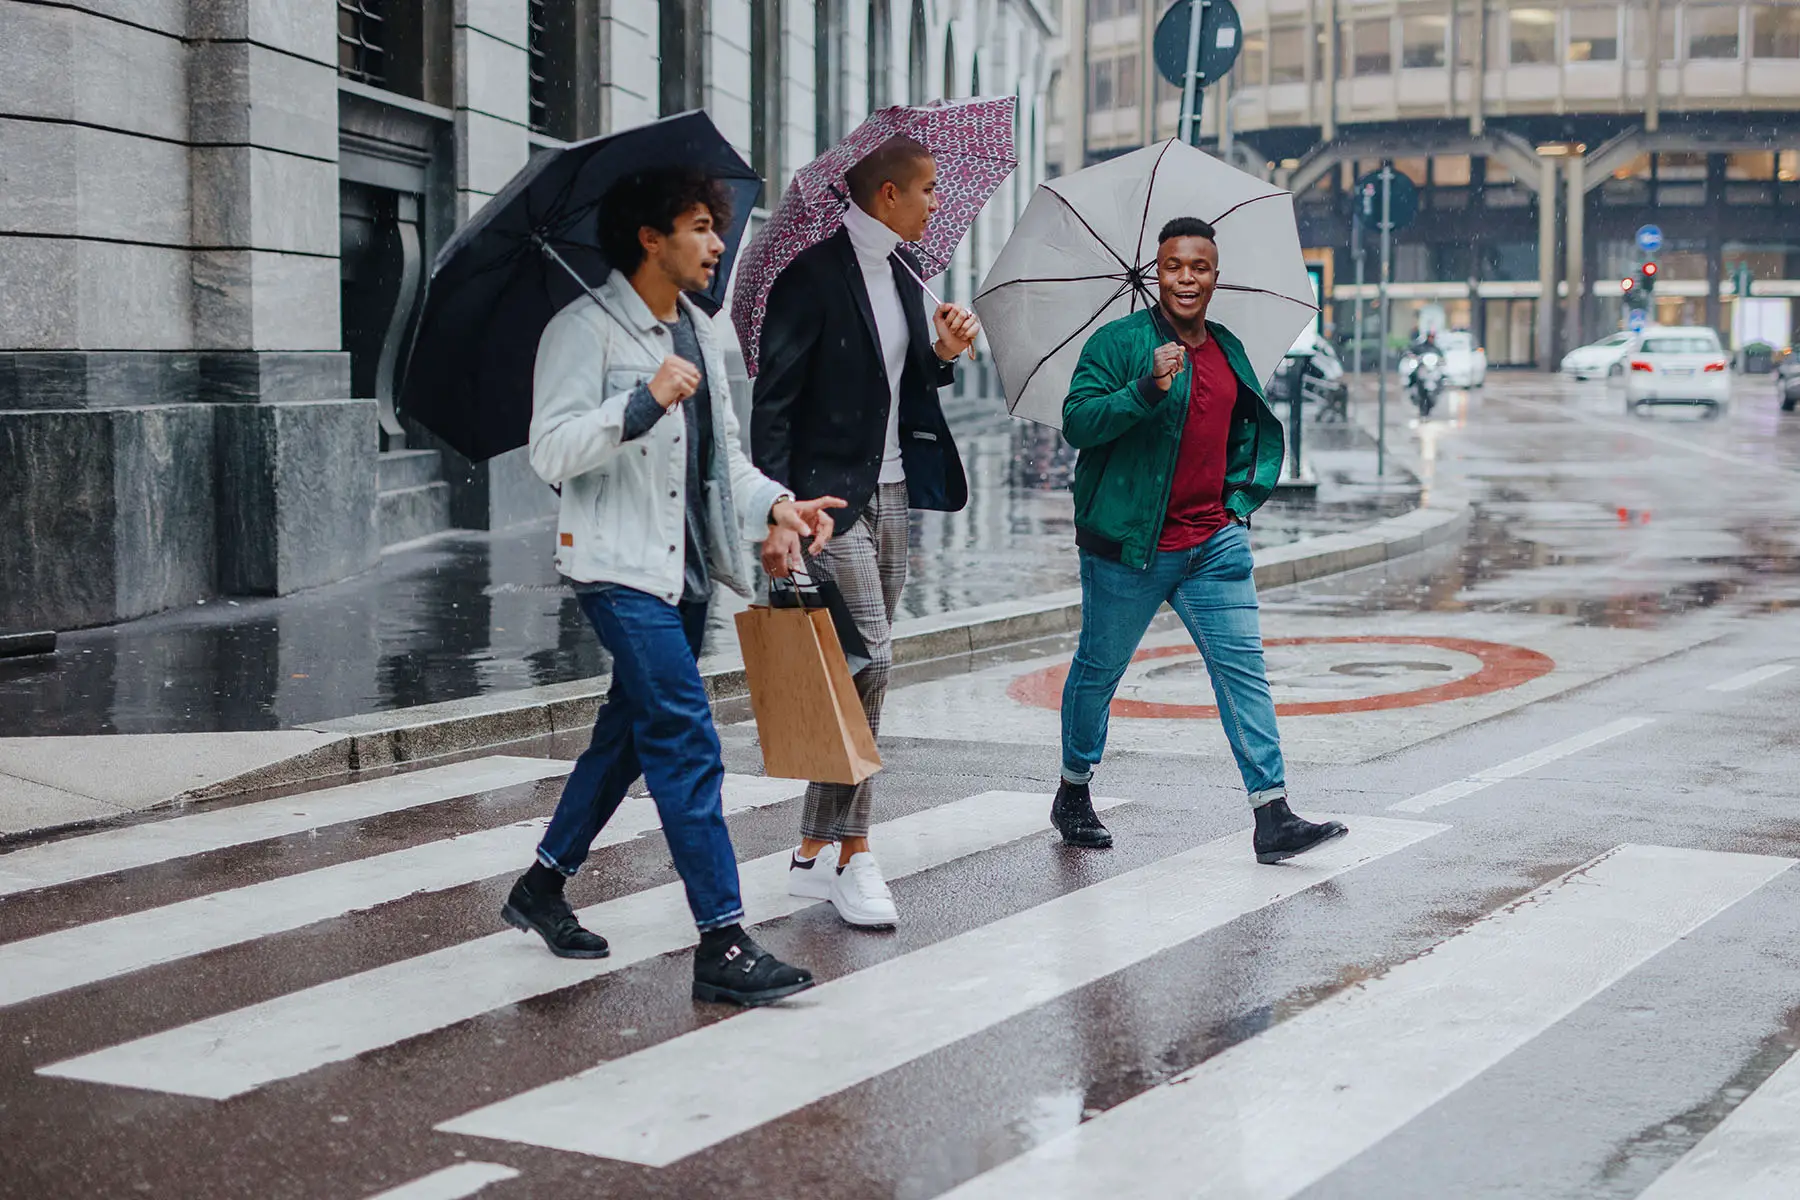 Three young men with shopping bags walking in the rain holding umbrellas.